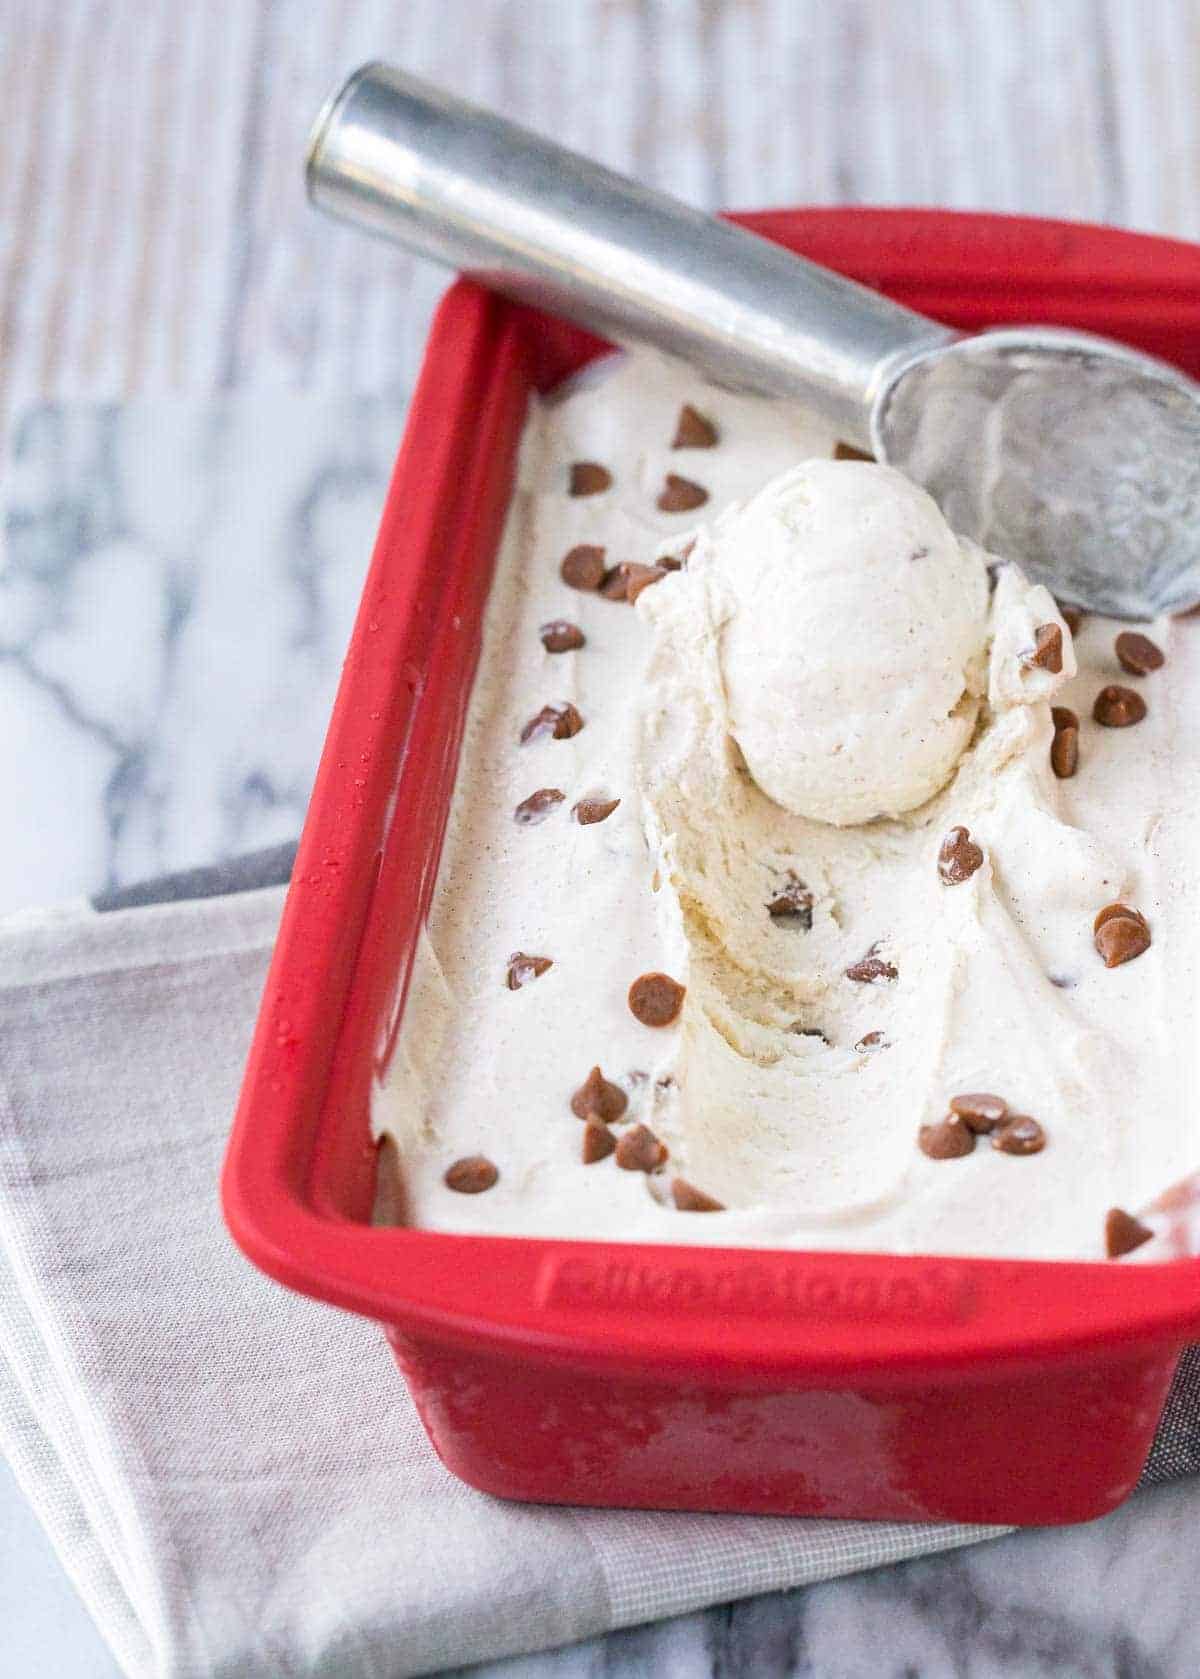 Frozen ice cream in red ceramic loaf pan, with ice cream scoop.